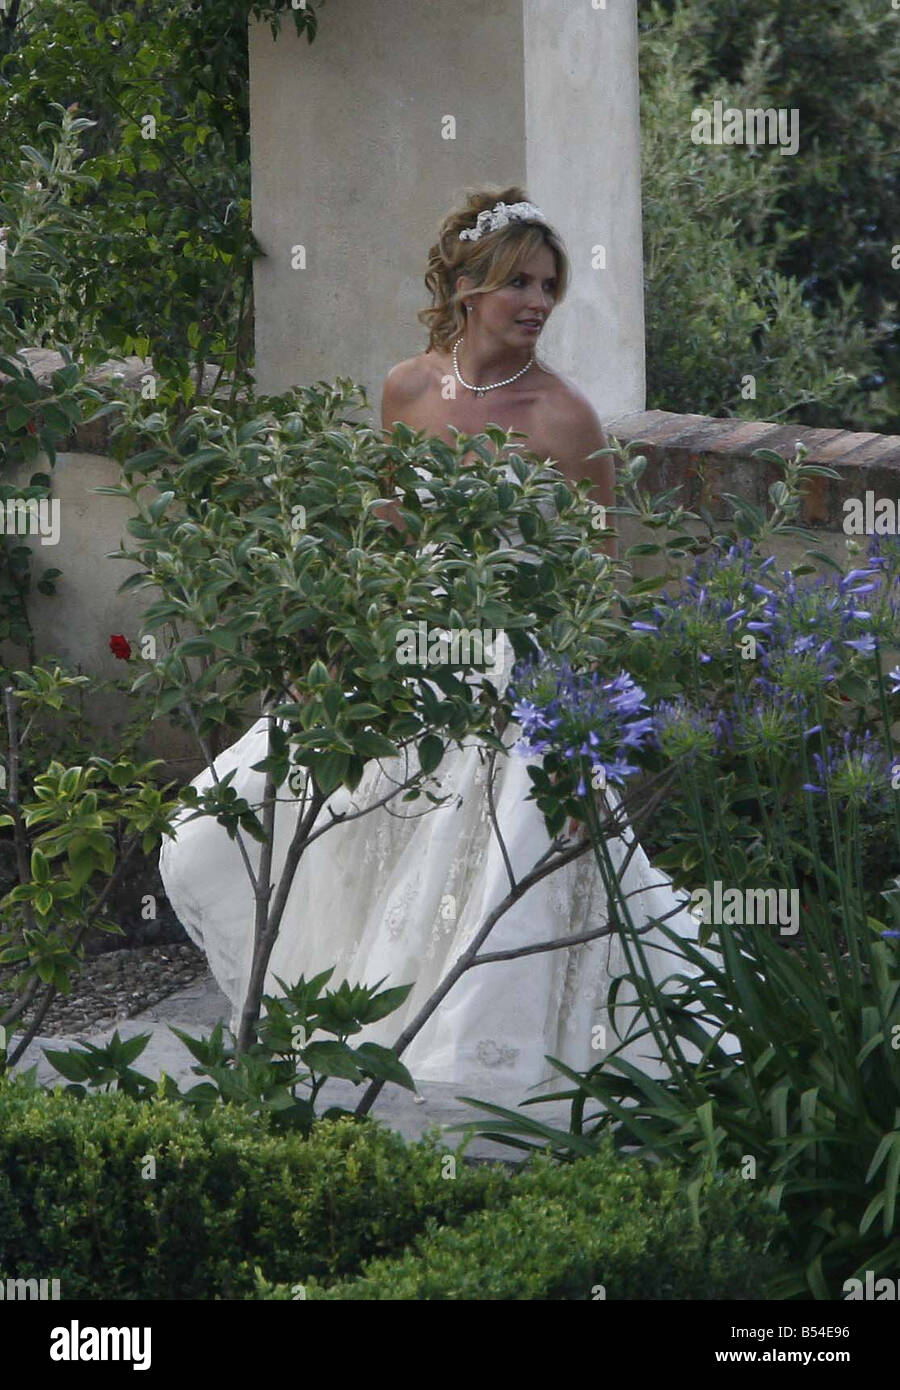 Penny Lancaster in wedding dress posing for photographs Stock Photo